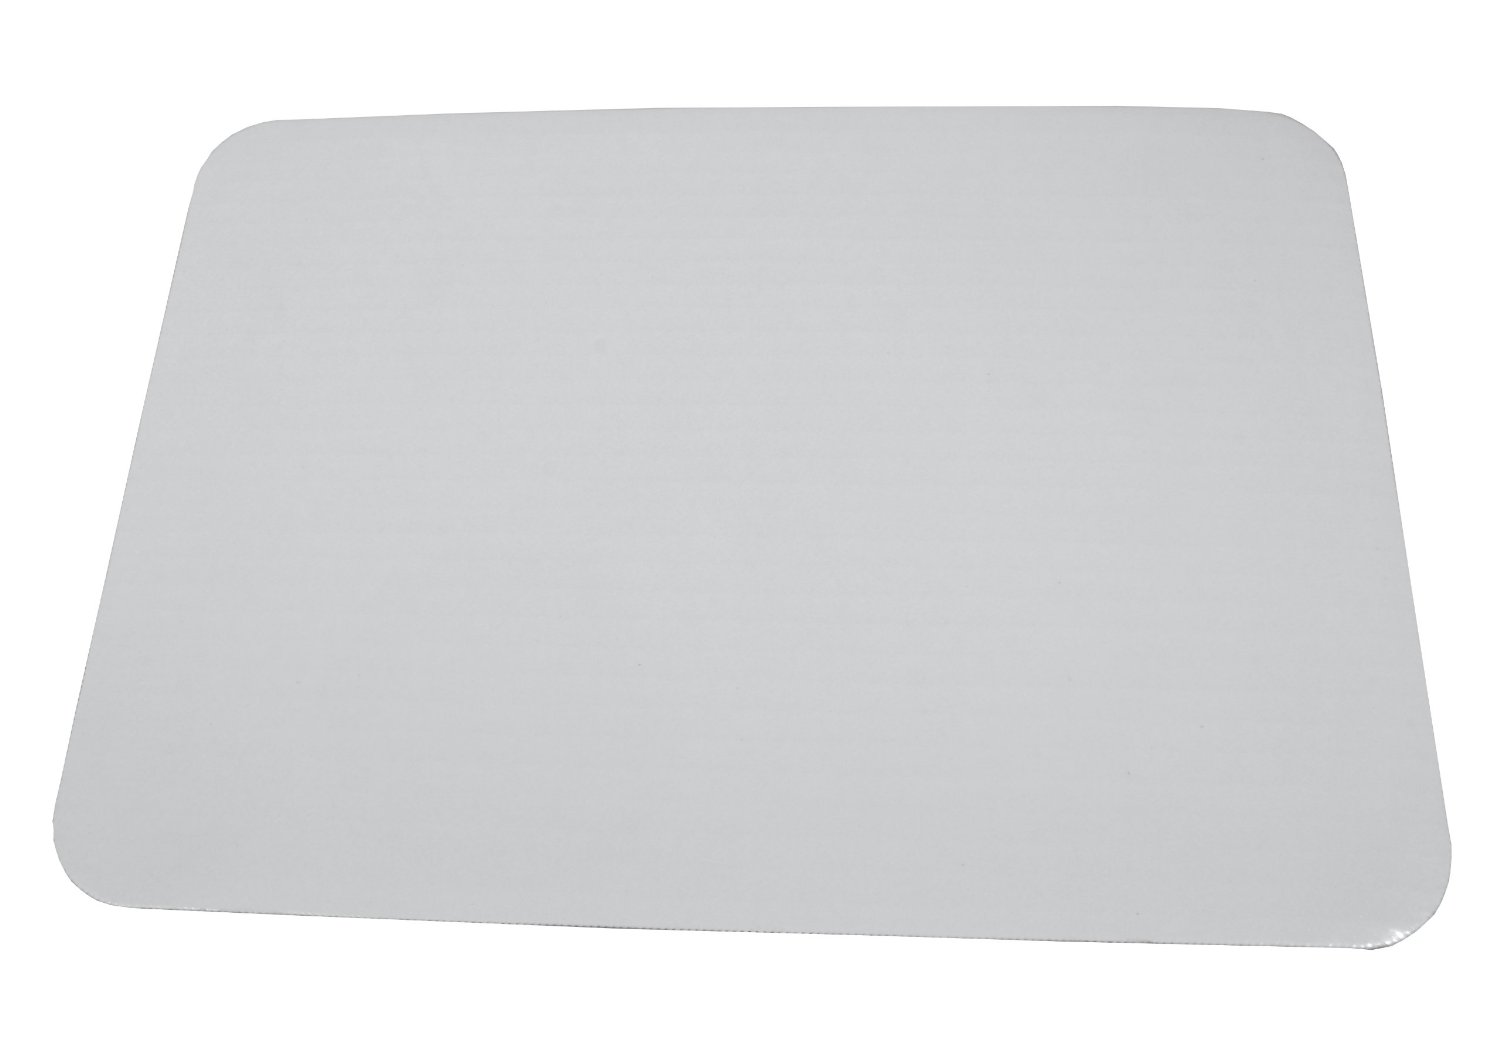 1157 White 25&quot;x18&quot; Corrugated
Coated Greaseproof Full Sheet
Pad - 50